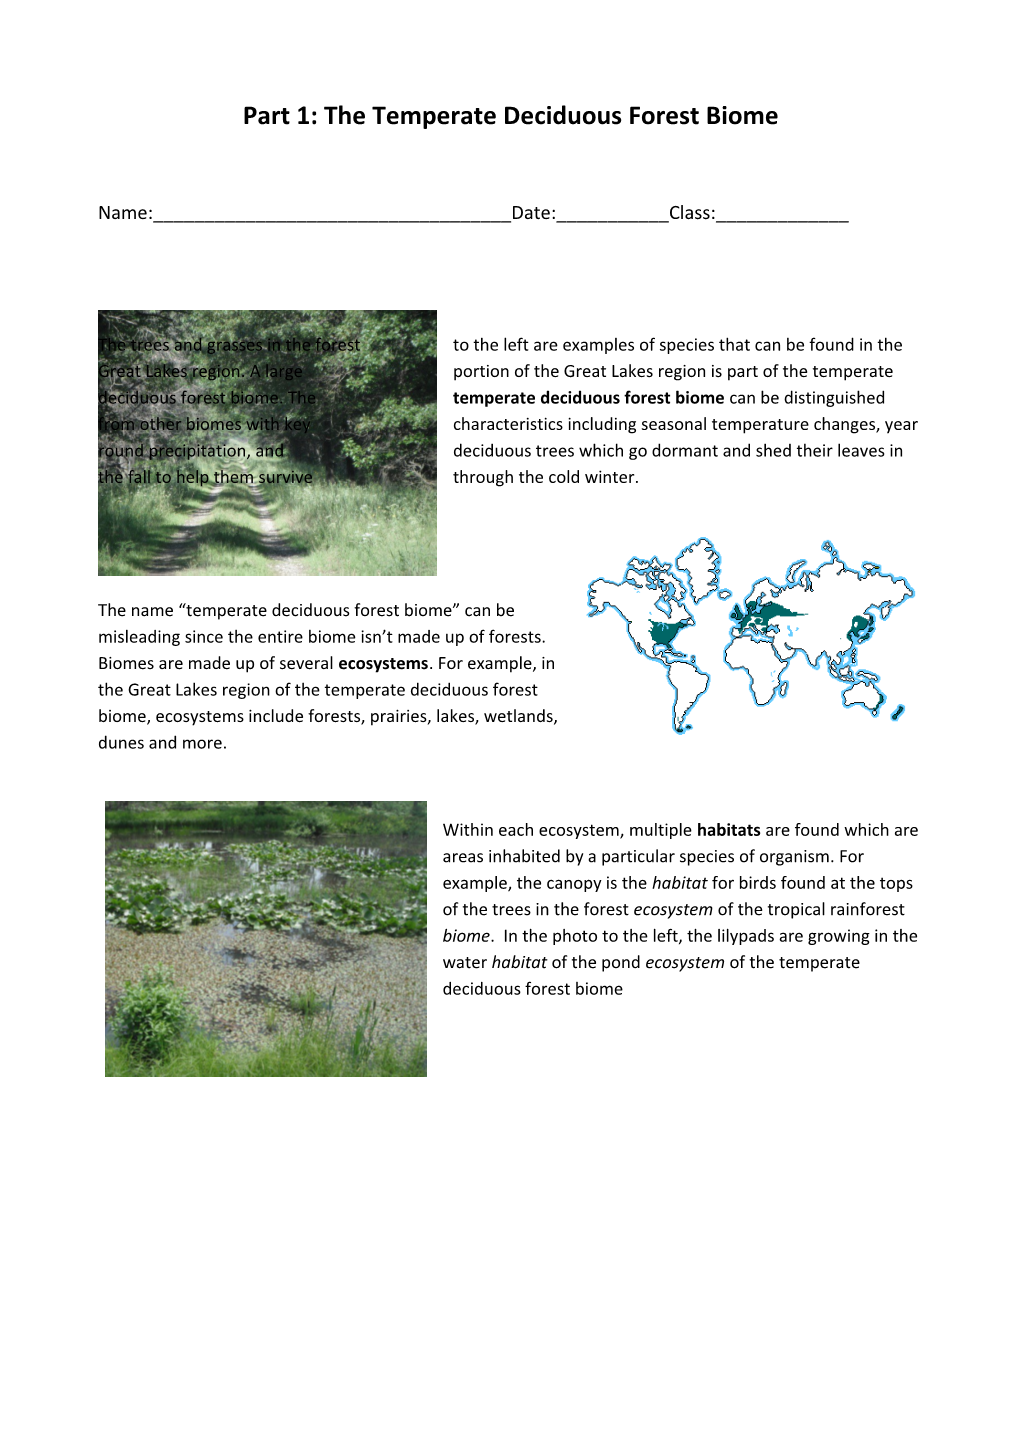 Part 1: the Temperate Deciduous Forest Biome